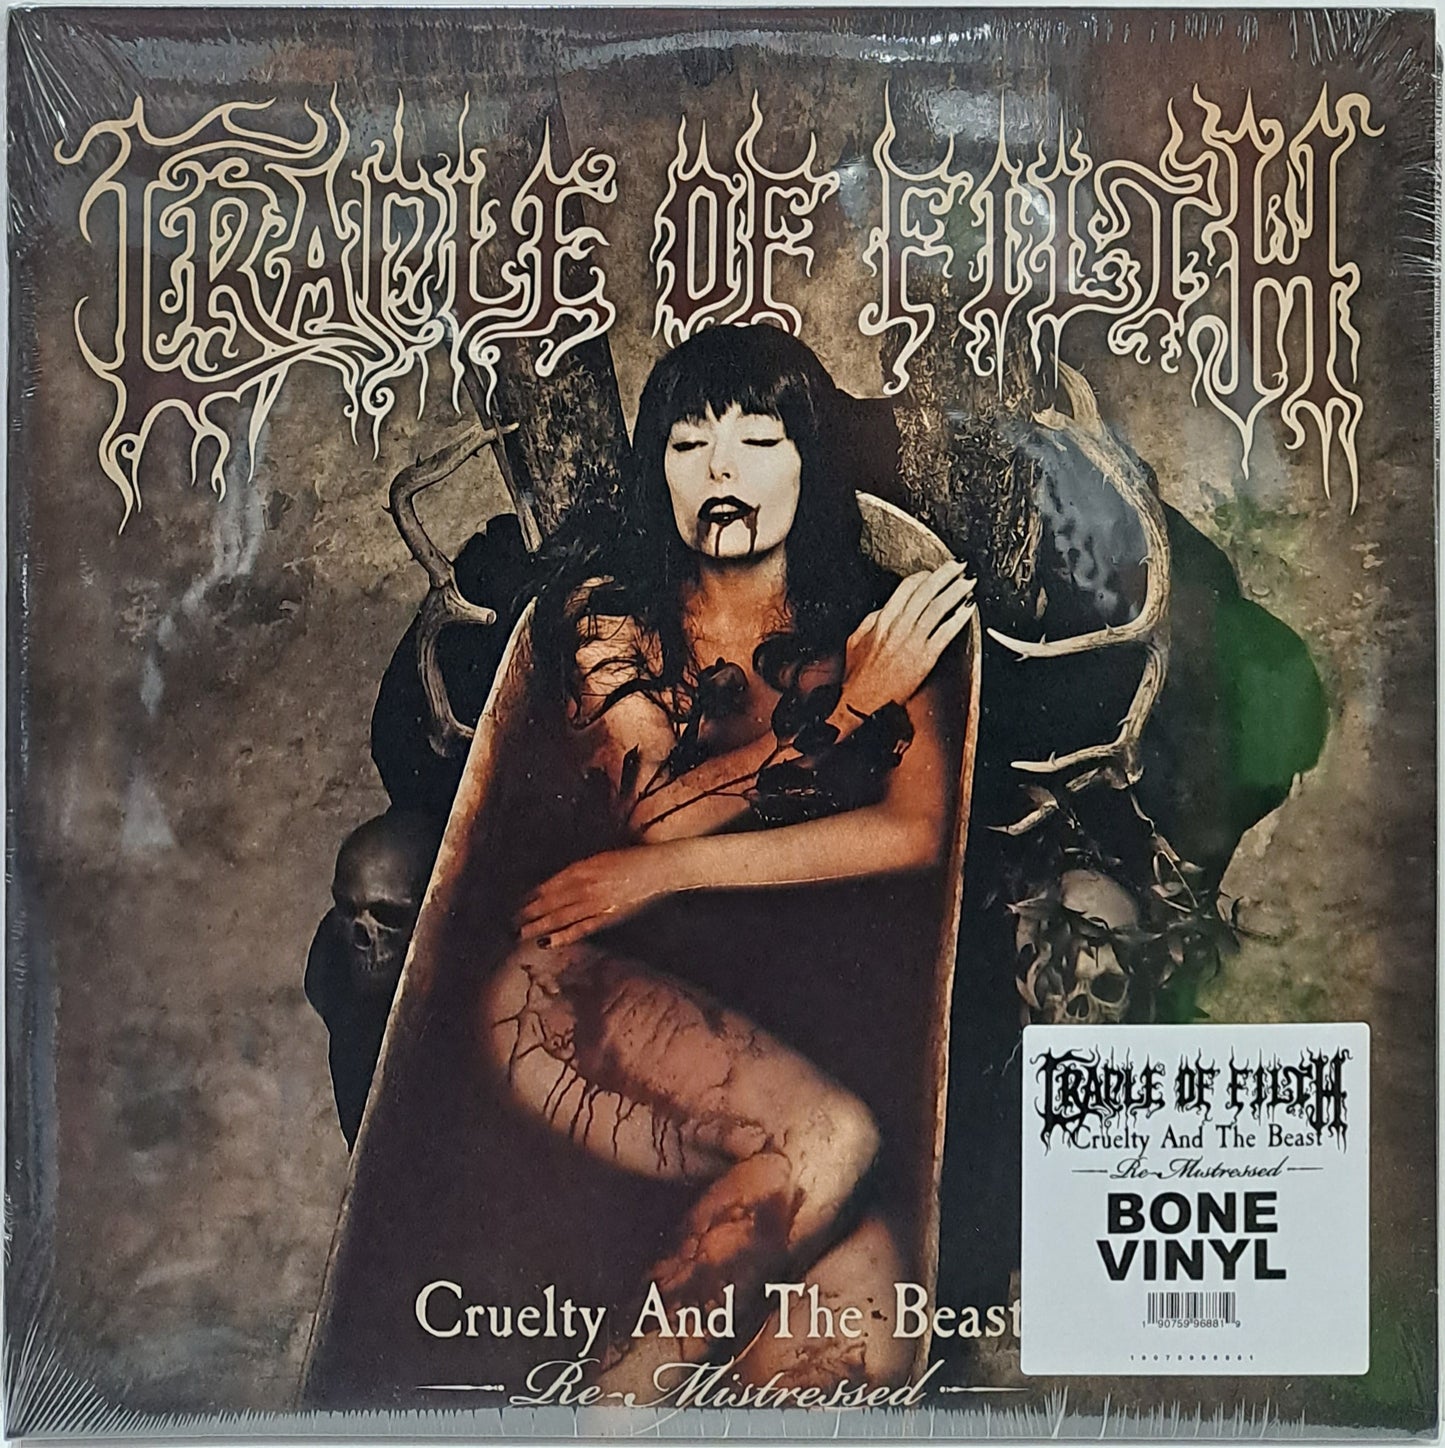 CRADLE OF FILTH - CRUELTY AND THE BEAST  2 LPS